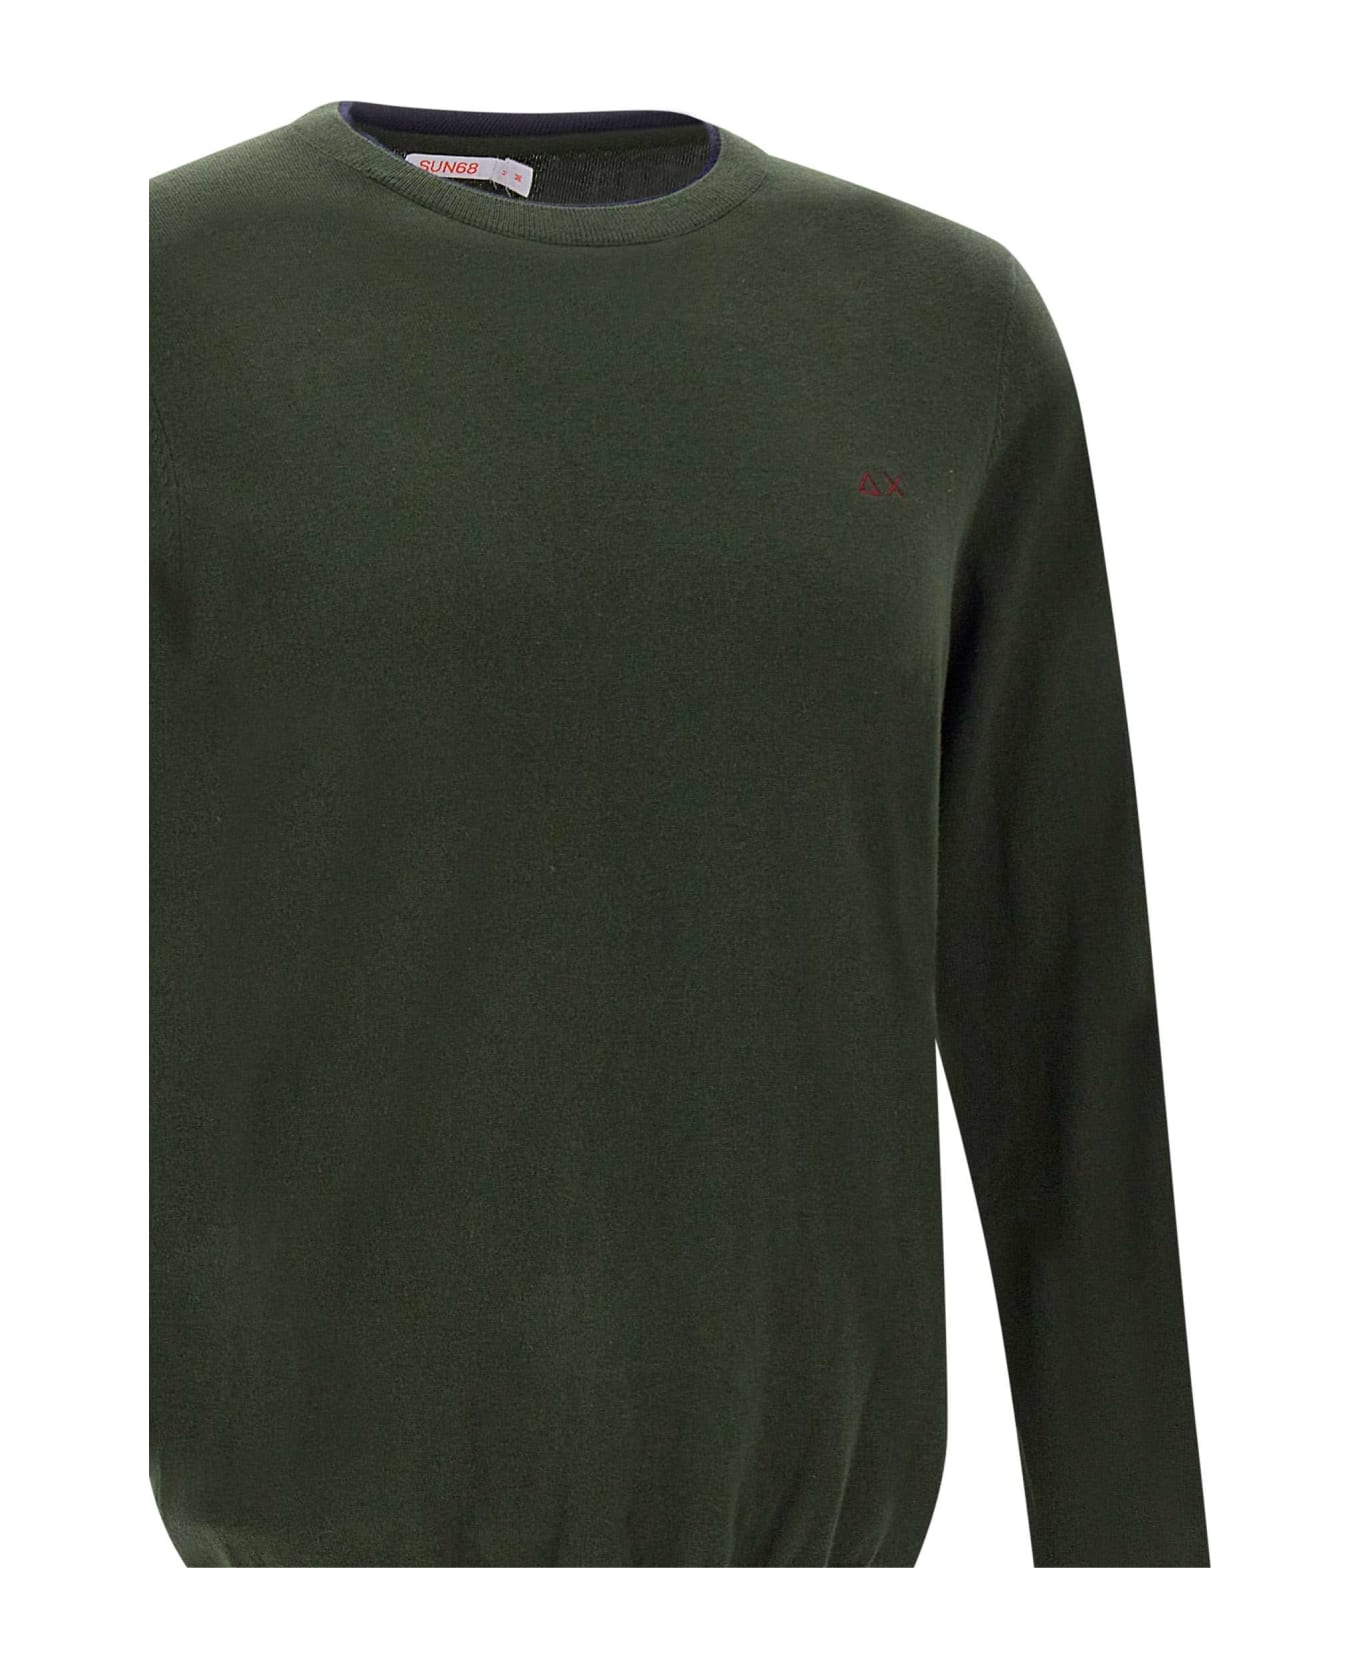 Sun 68 'round Double' Cotton And Wool Pullover Sweater - MILITARE